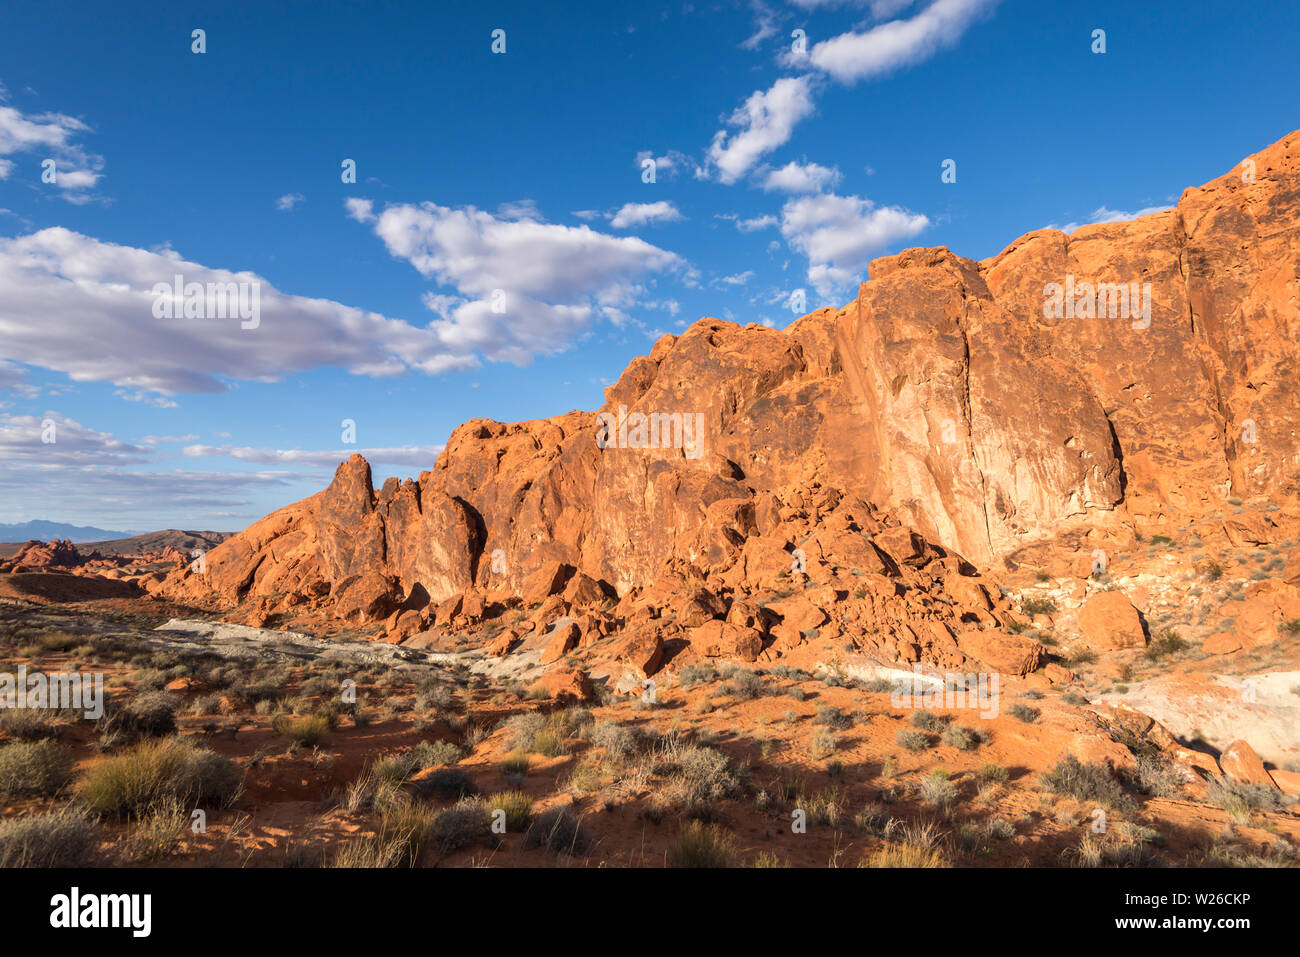 Gibraltar Rock at the Valley of Fire State Park, Nevada, USA. Stock Photo